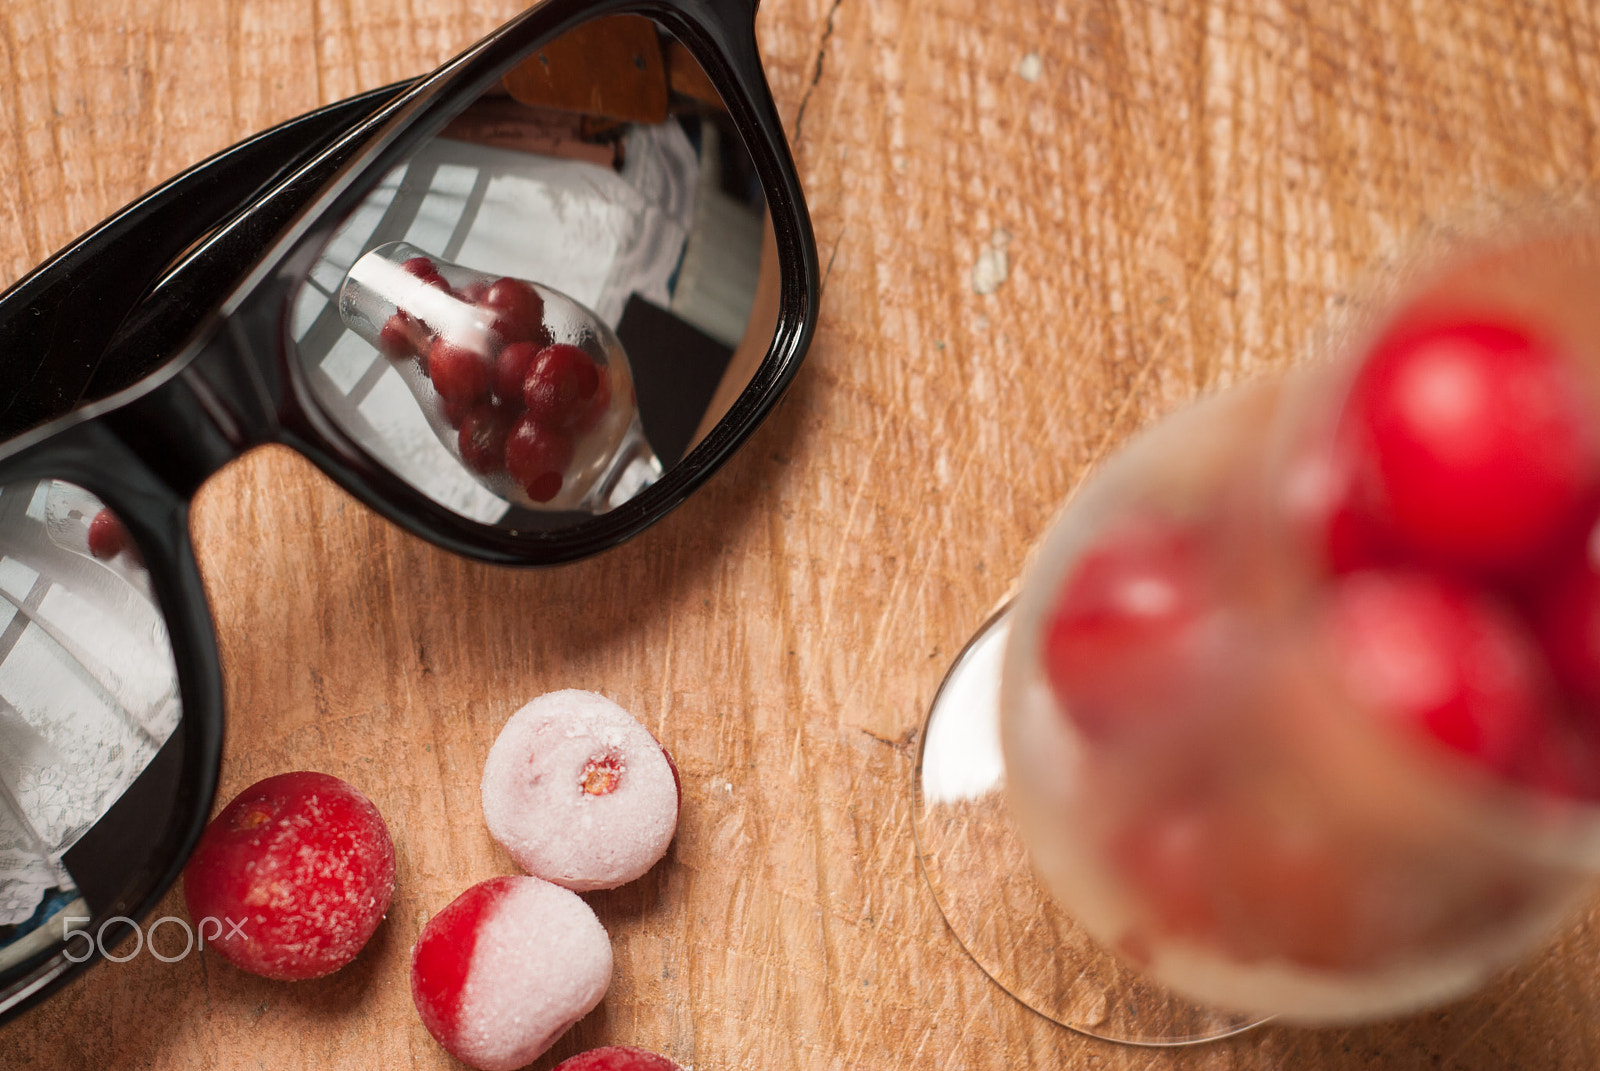 Nikon D80 + AF Nikkor 50mm f/1.8 N sample photo. Frozen cherries in the glasses and sunglasses on a wooden table photography